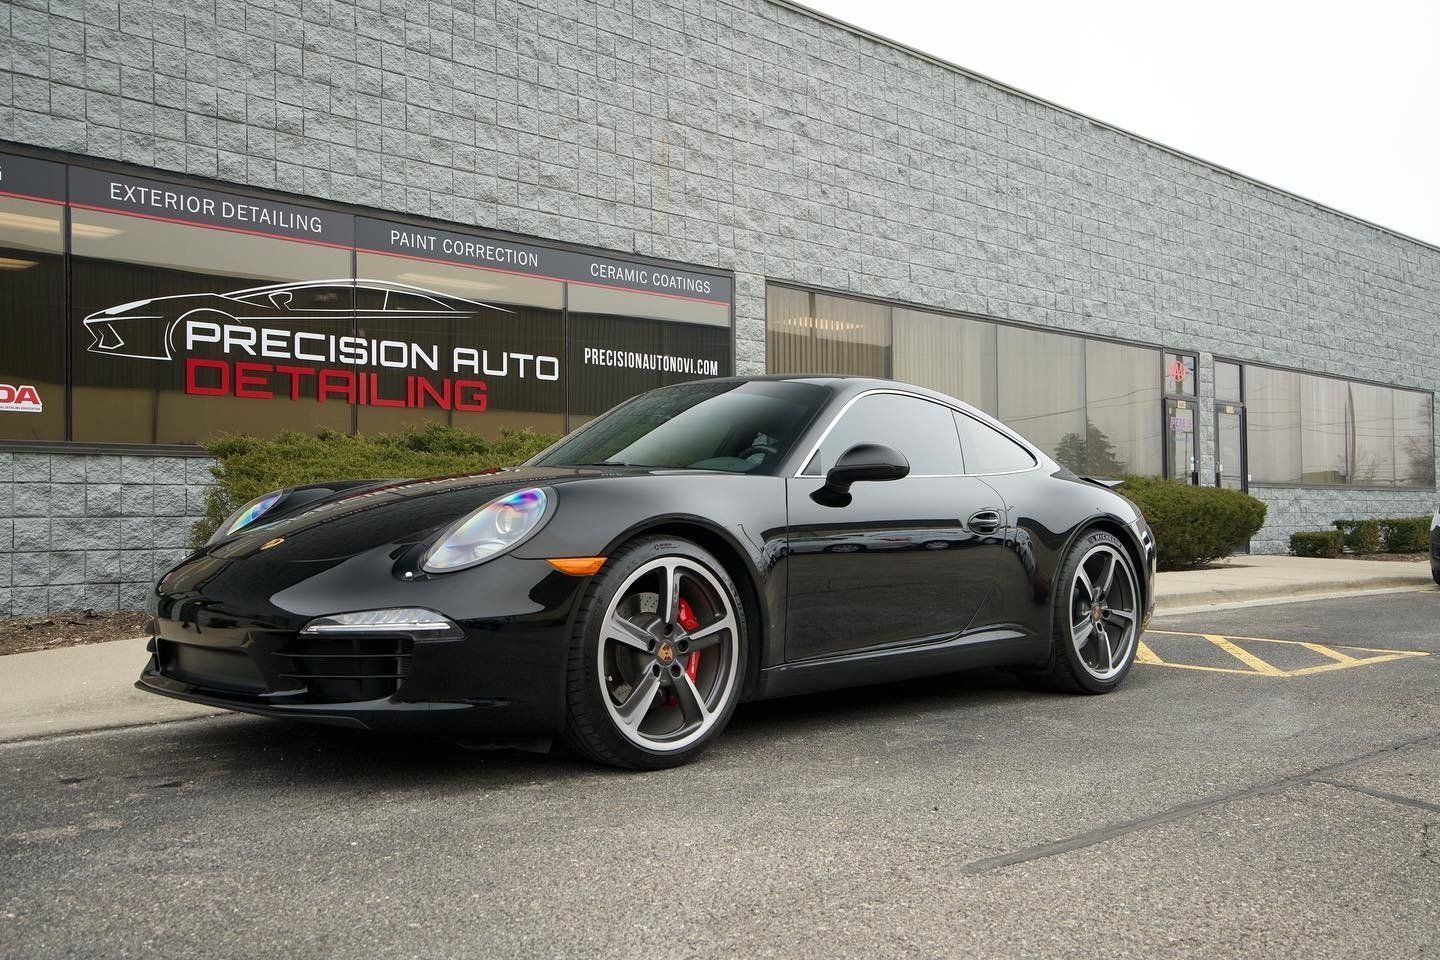 A black porsche 911 is parked in front of a building.